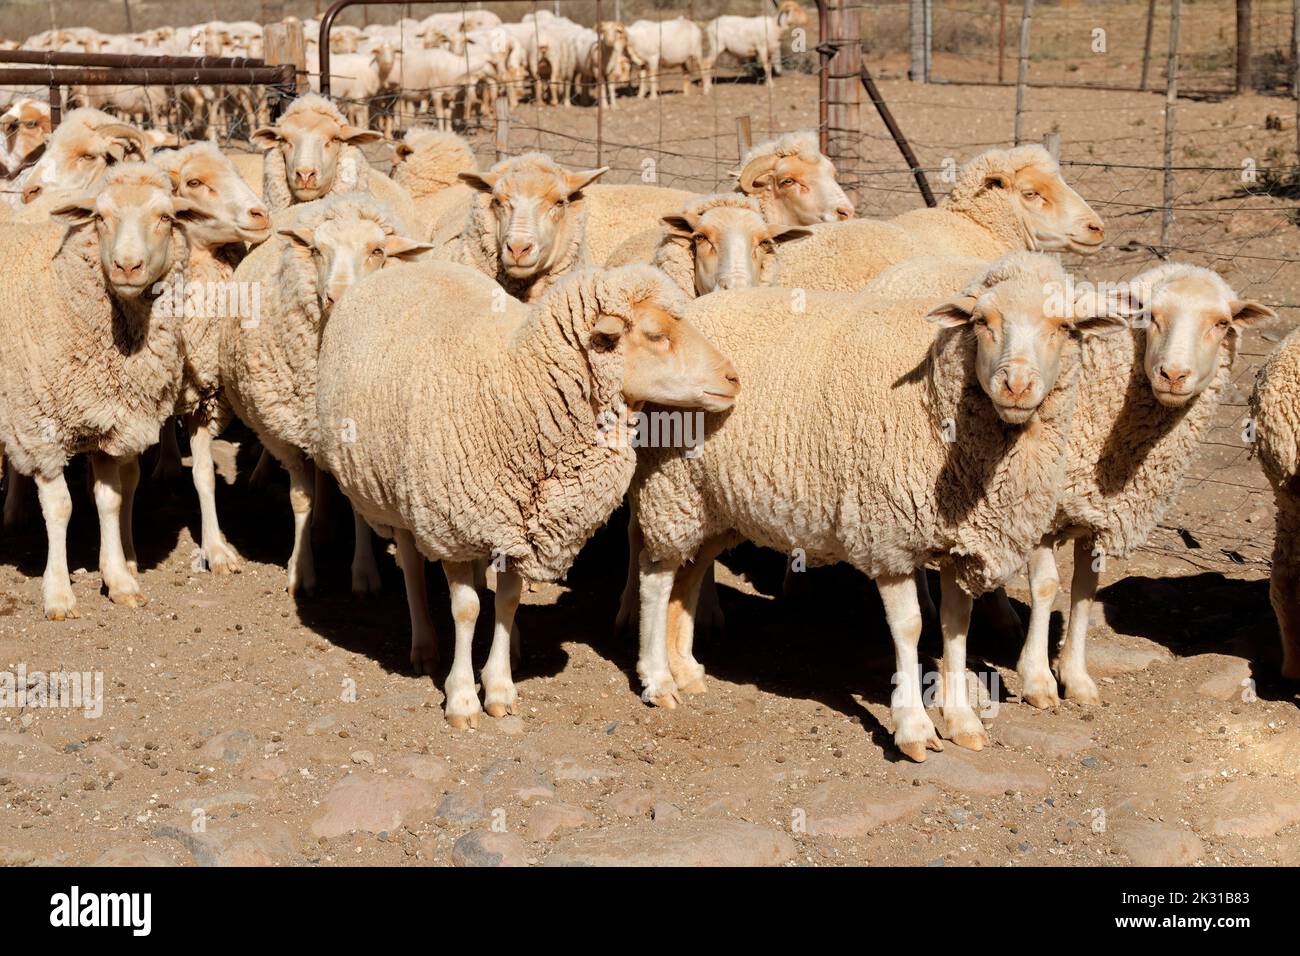 Merino sheep in a paddock on a rural South African farm Stock Photo